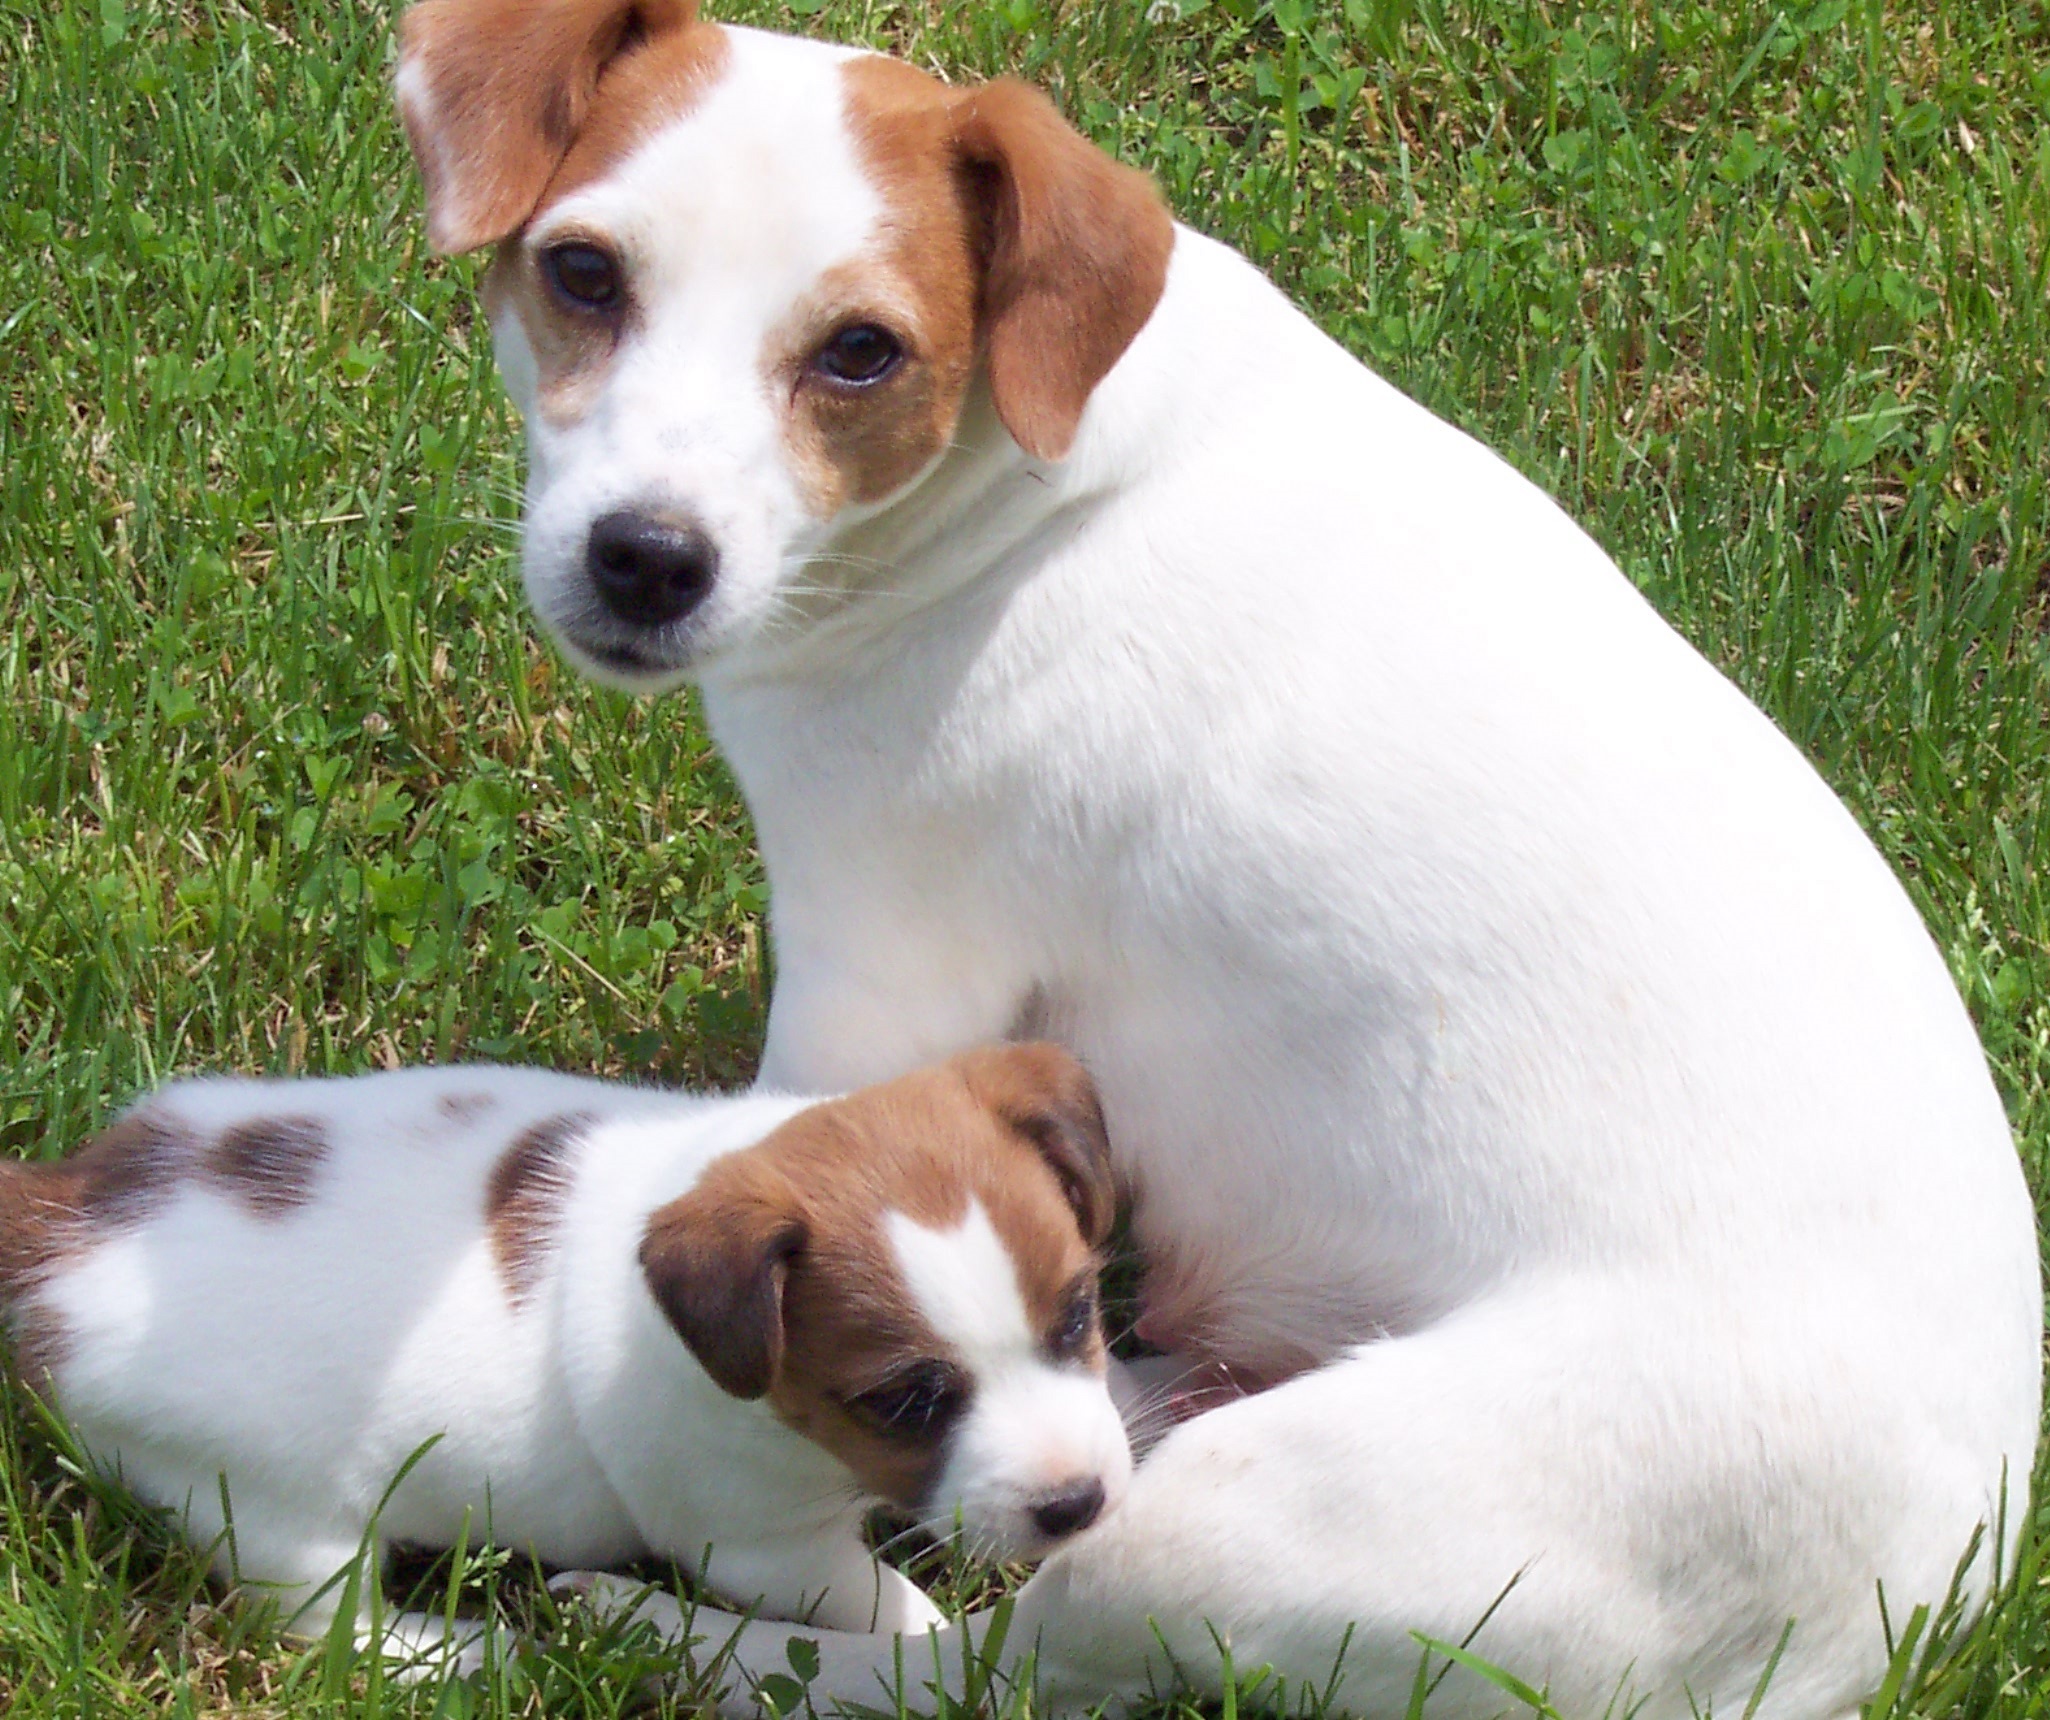 Female dog names for jack russell terriers